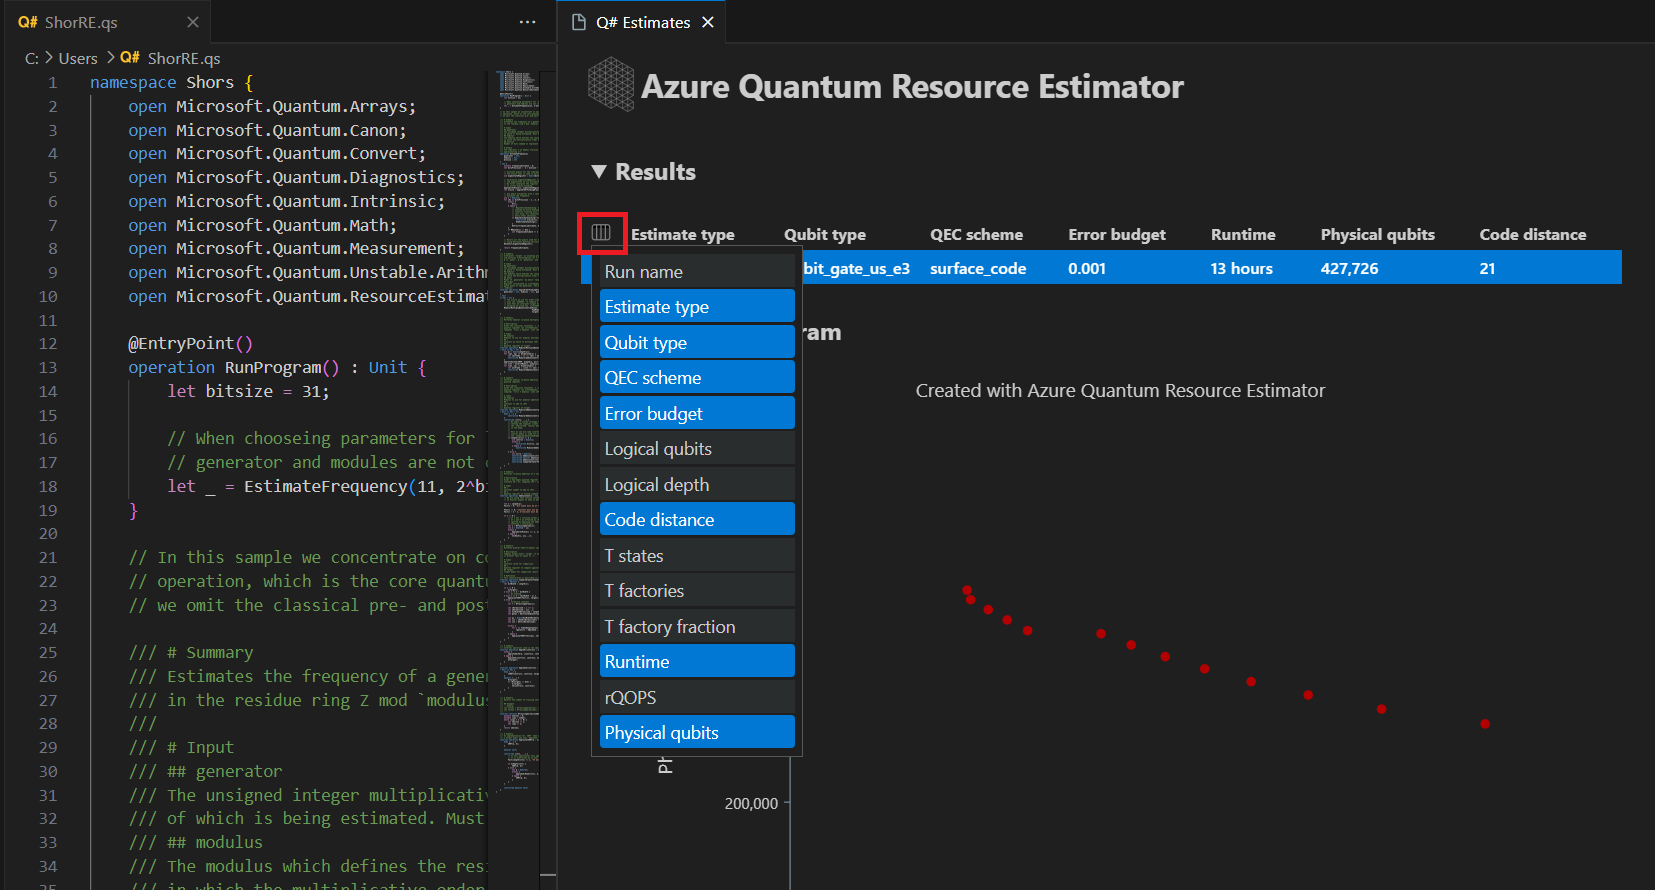 Screenshot showing how to display the menu to select the resource estimate outputs of your choice.